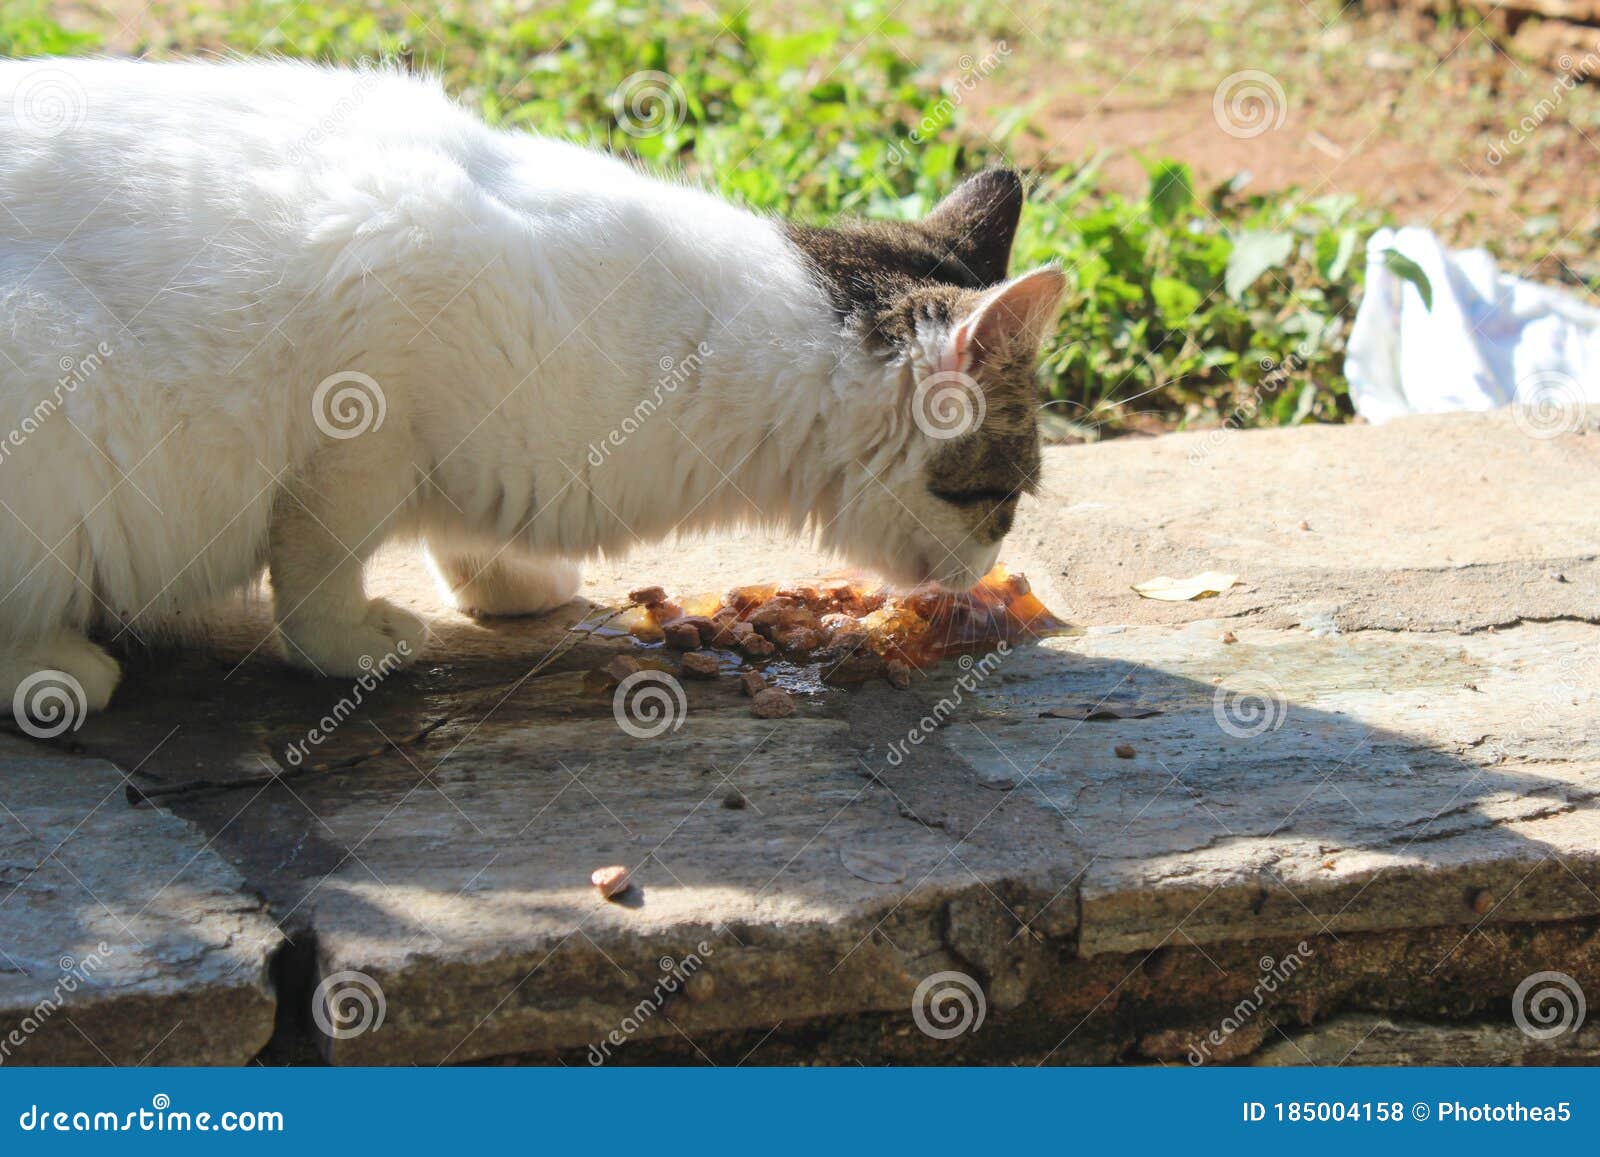 Stray Homeless Cat In Snow Cold Winter Outdoors Eat Food Stock Photo